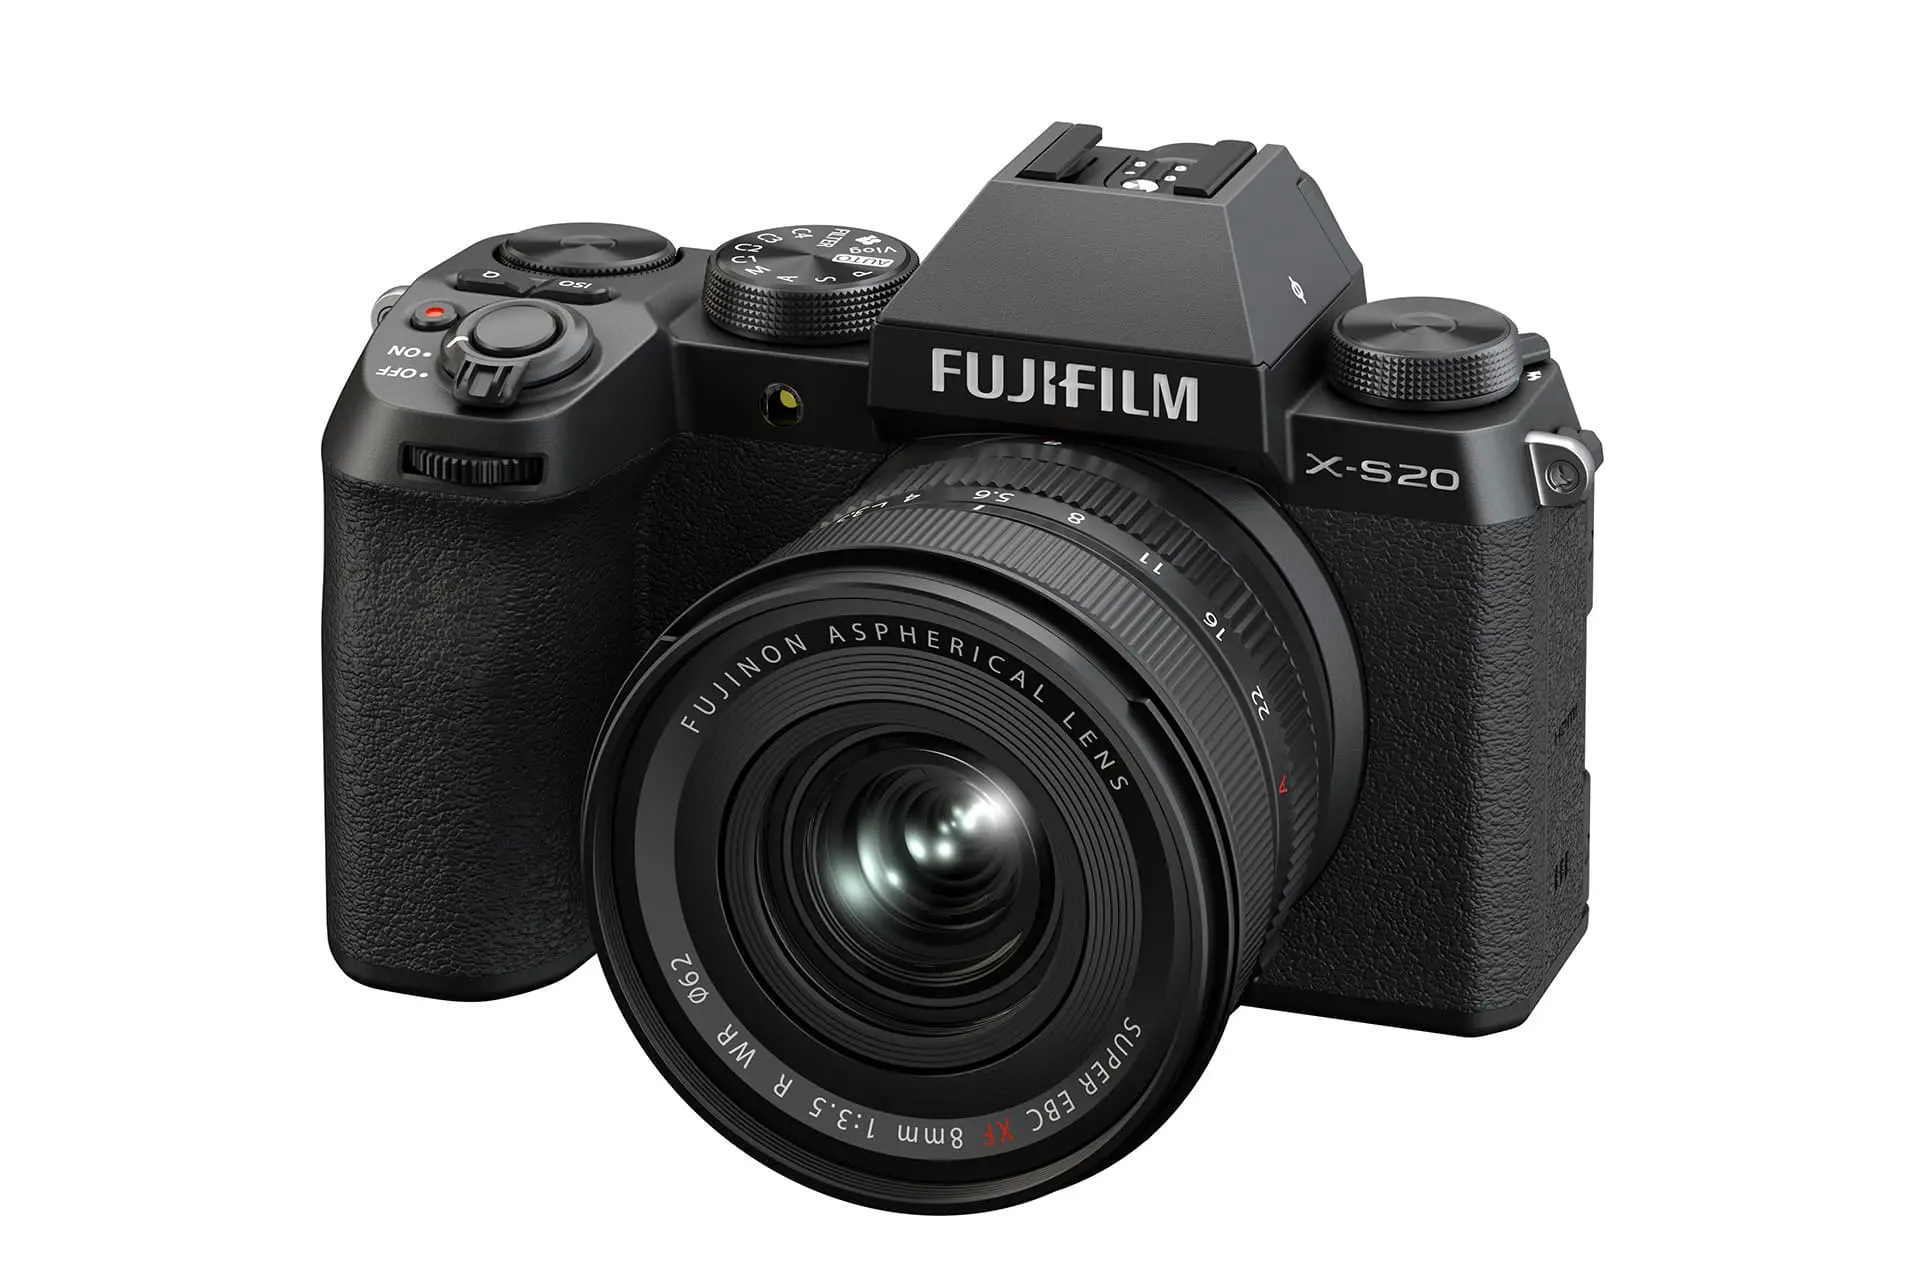 Front view of Fujifilm X-S20 camera with lens